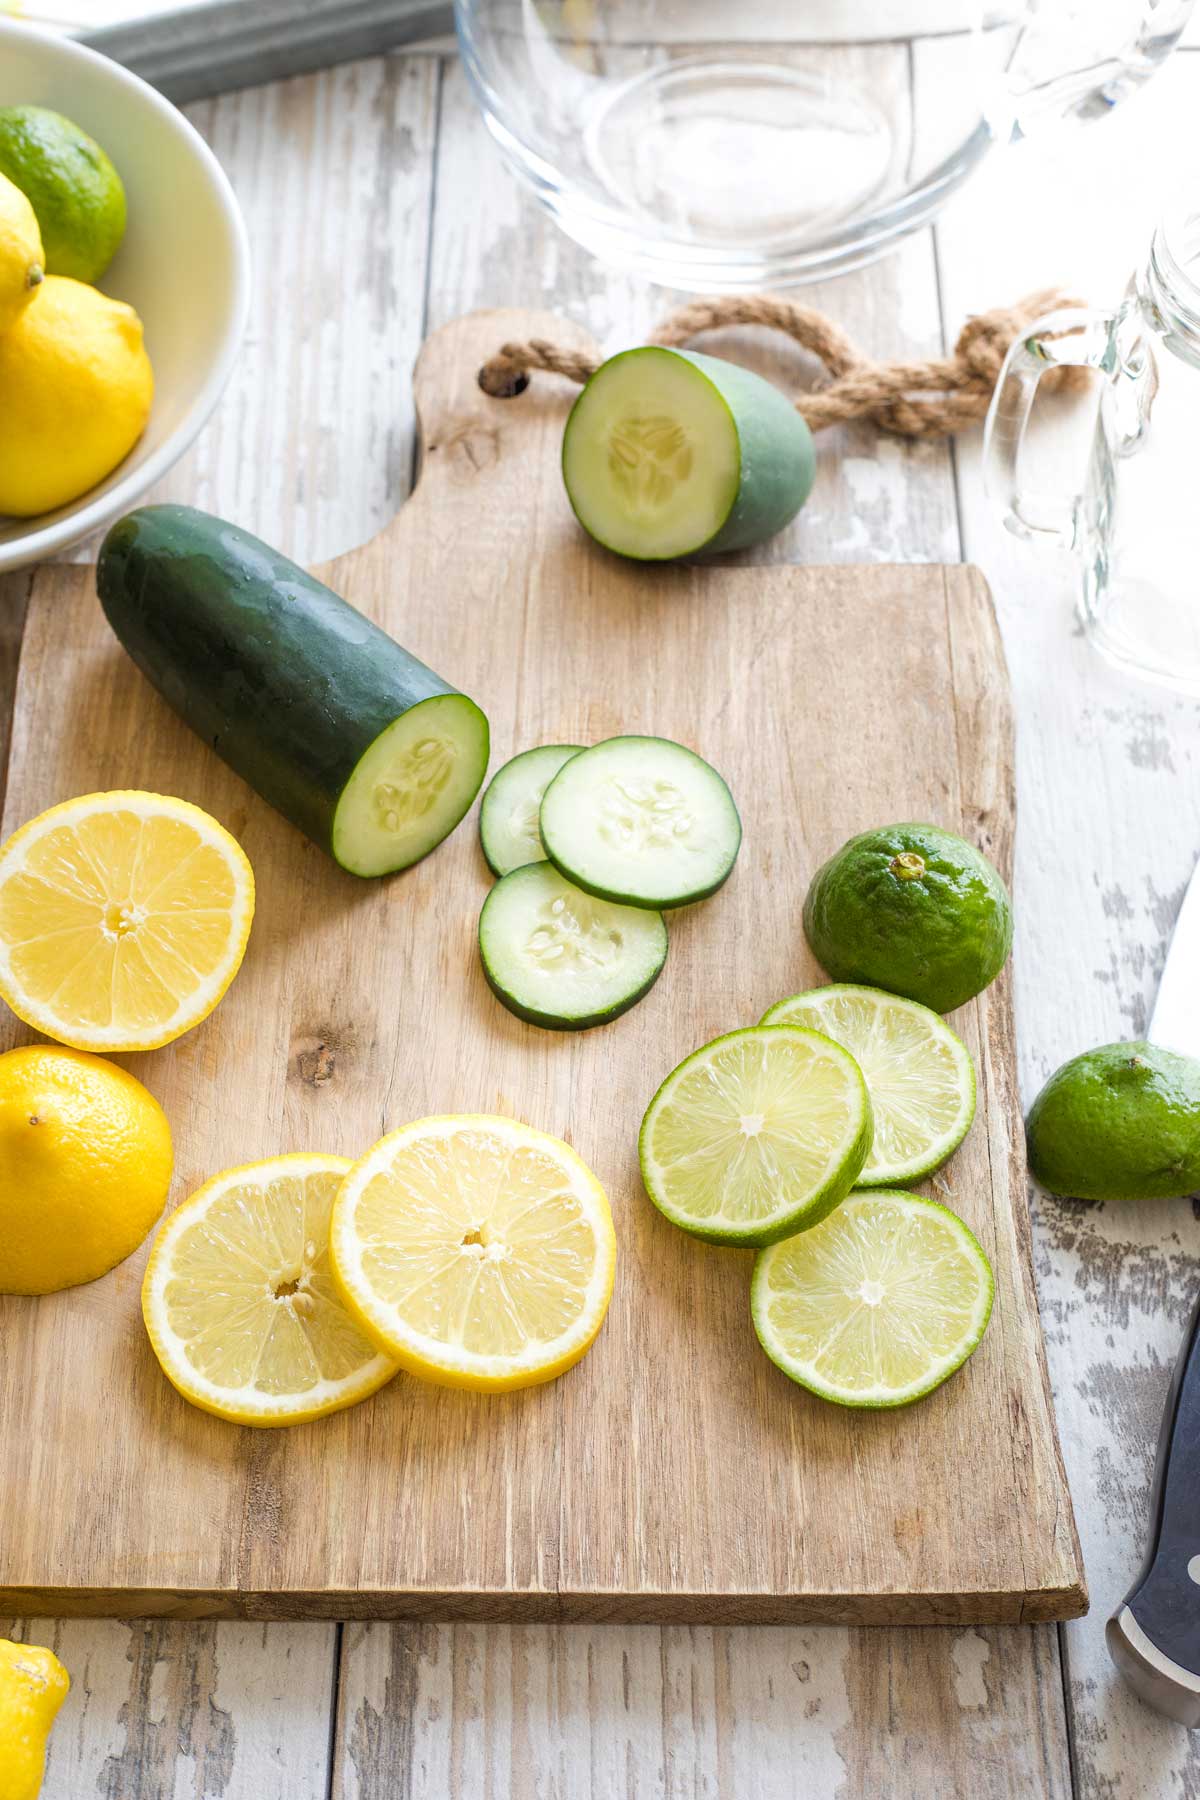 Sliced lemon, lime and cucumber on wooden board with empty water pitcher in background.